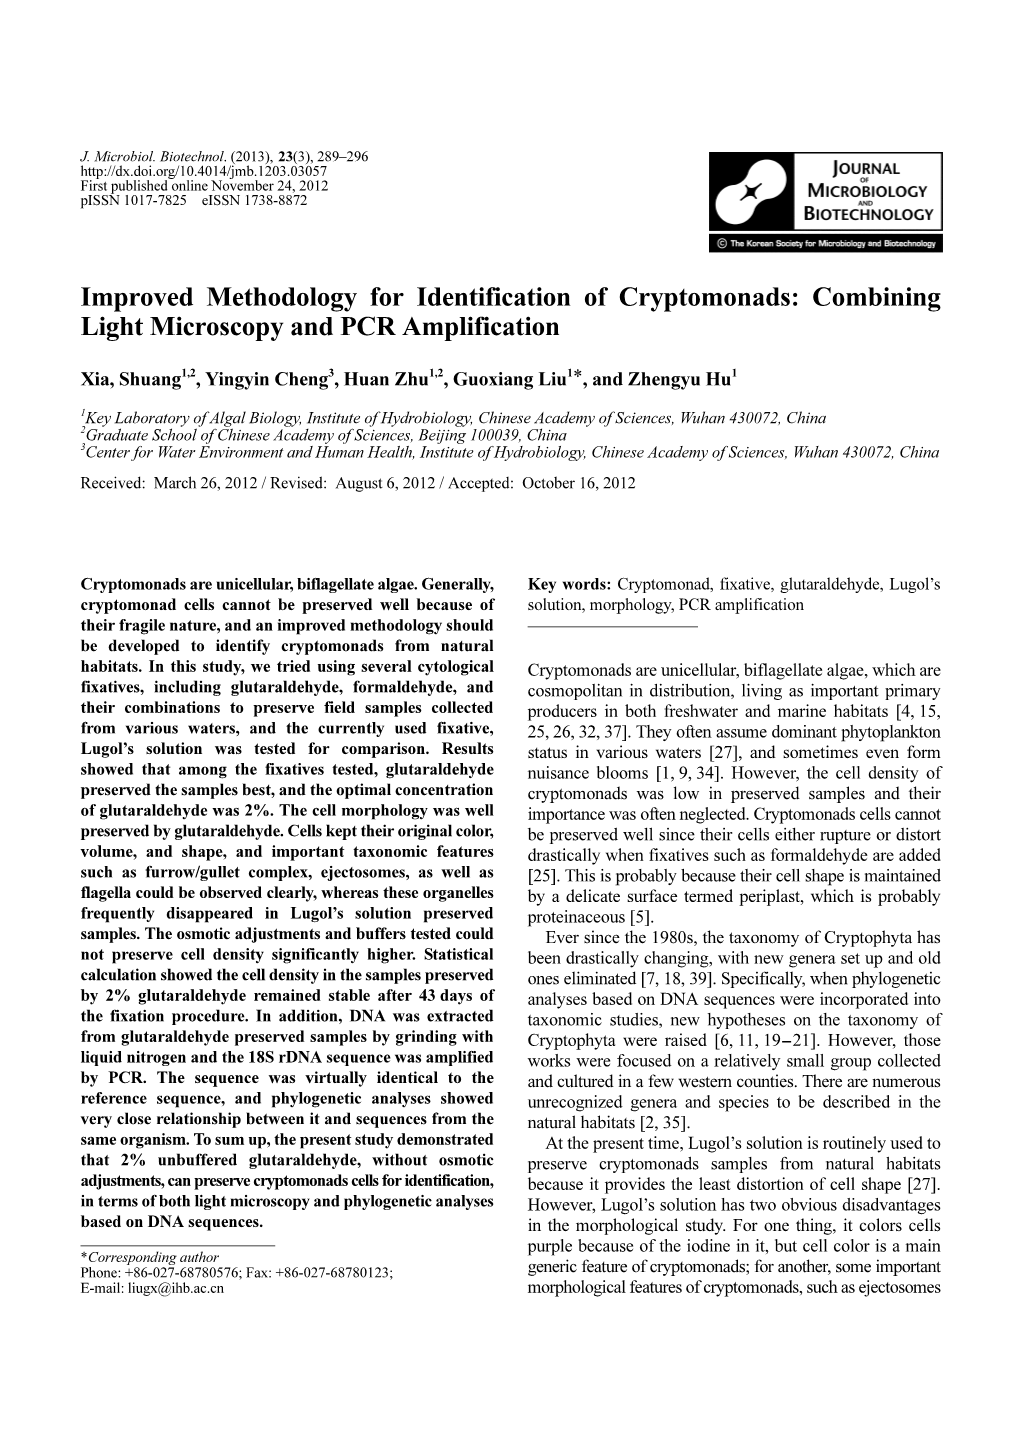 Improved Methodology for Identification of Cryptomonads: Combining Light Microscopy and PCR Amplification